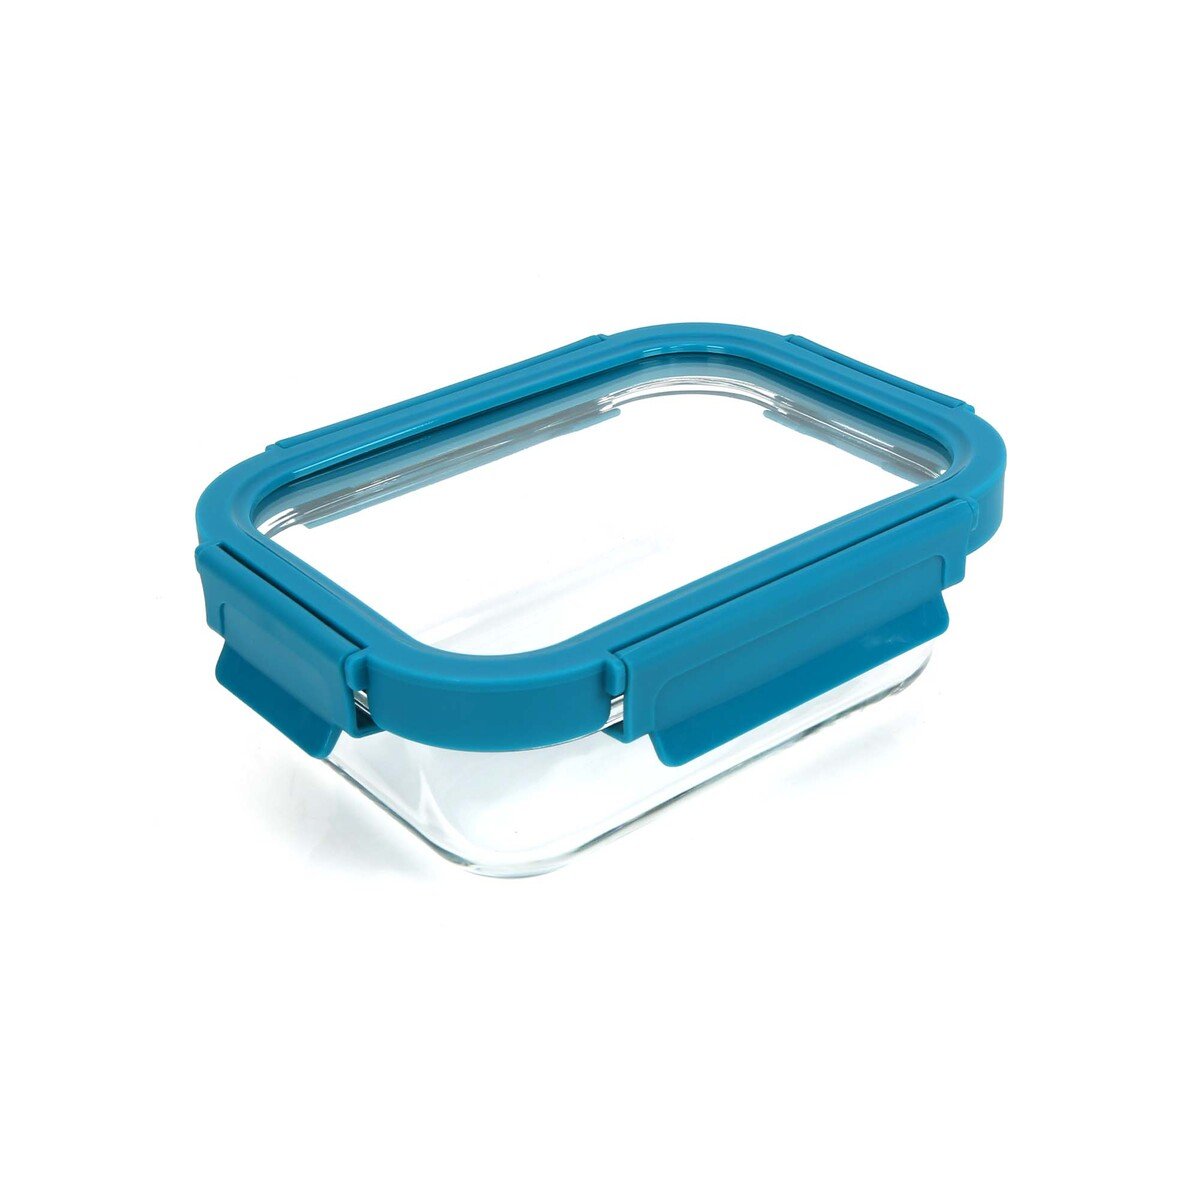 Chefline Rectangle Food Storage Glass Container With Lid, Blue (Teal Blue), 640 ml